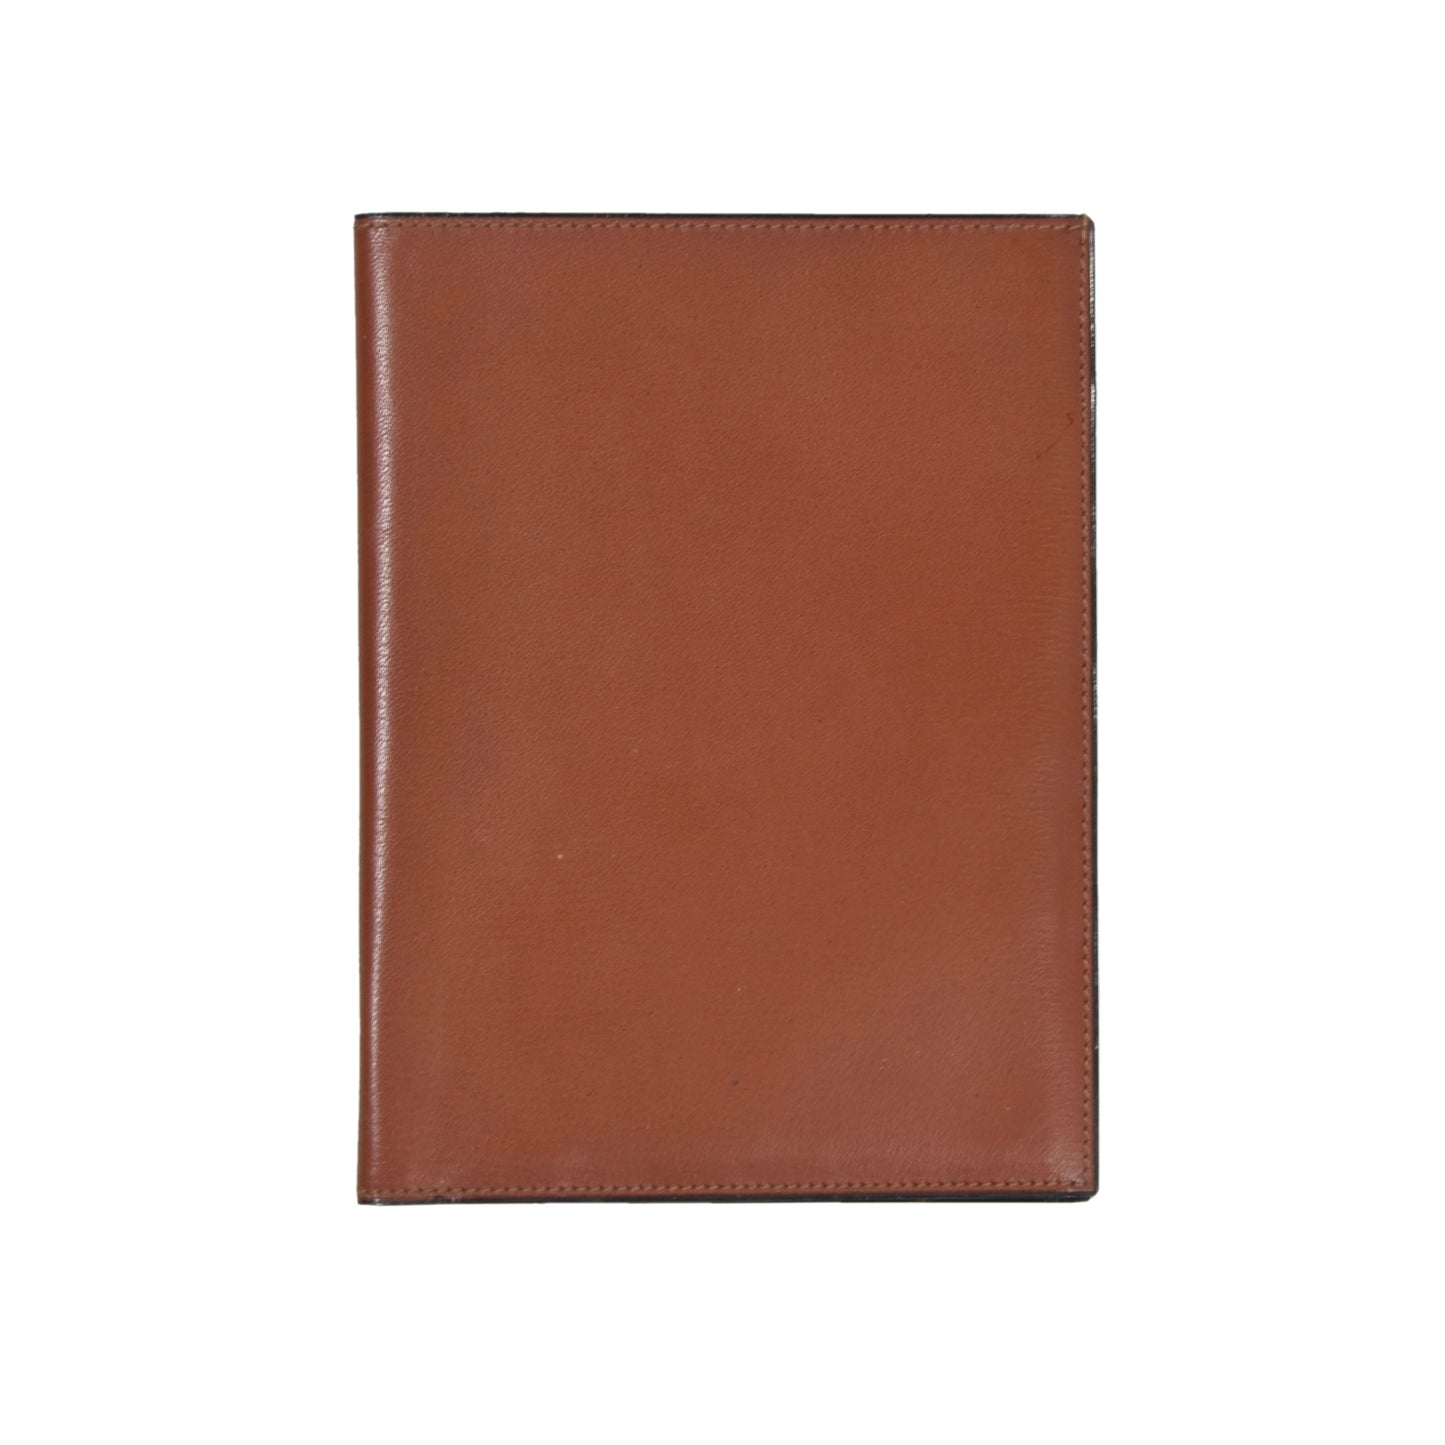 NOS Valextra Milano Breast Wallet with Notepad - Tan/Brown